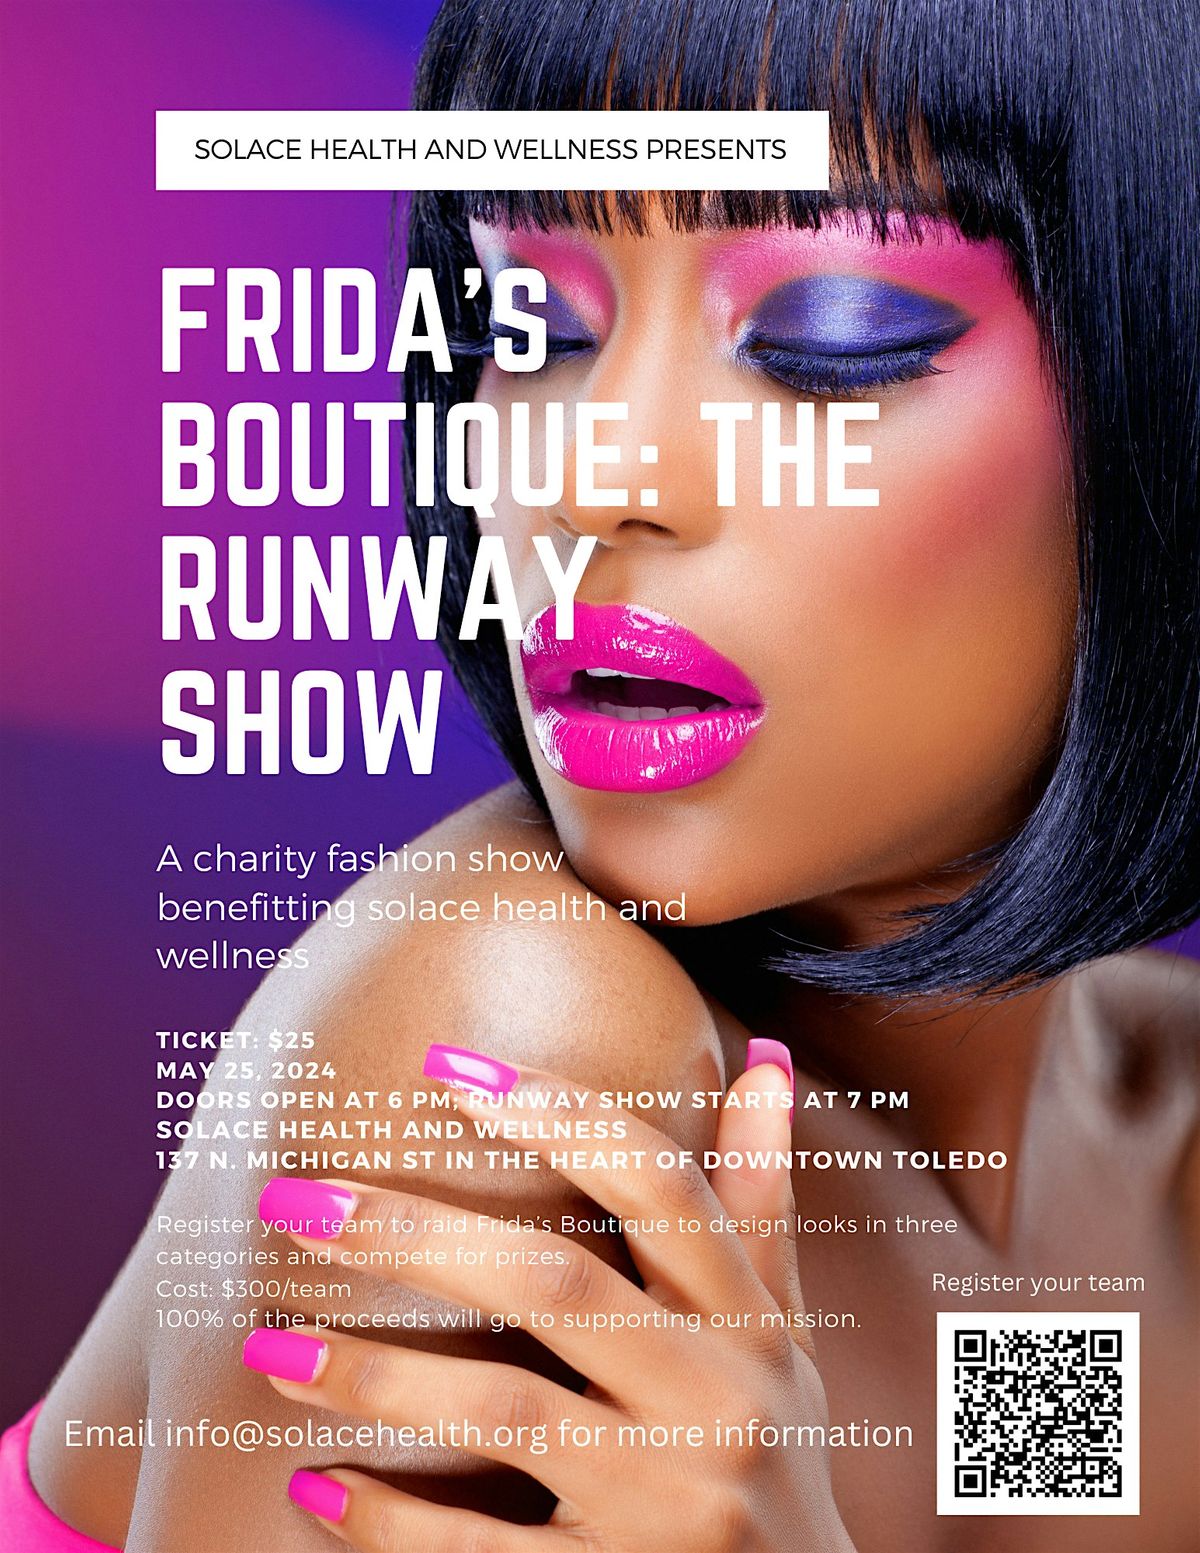 Frida's Boutique: The Runway Show